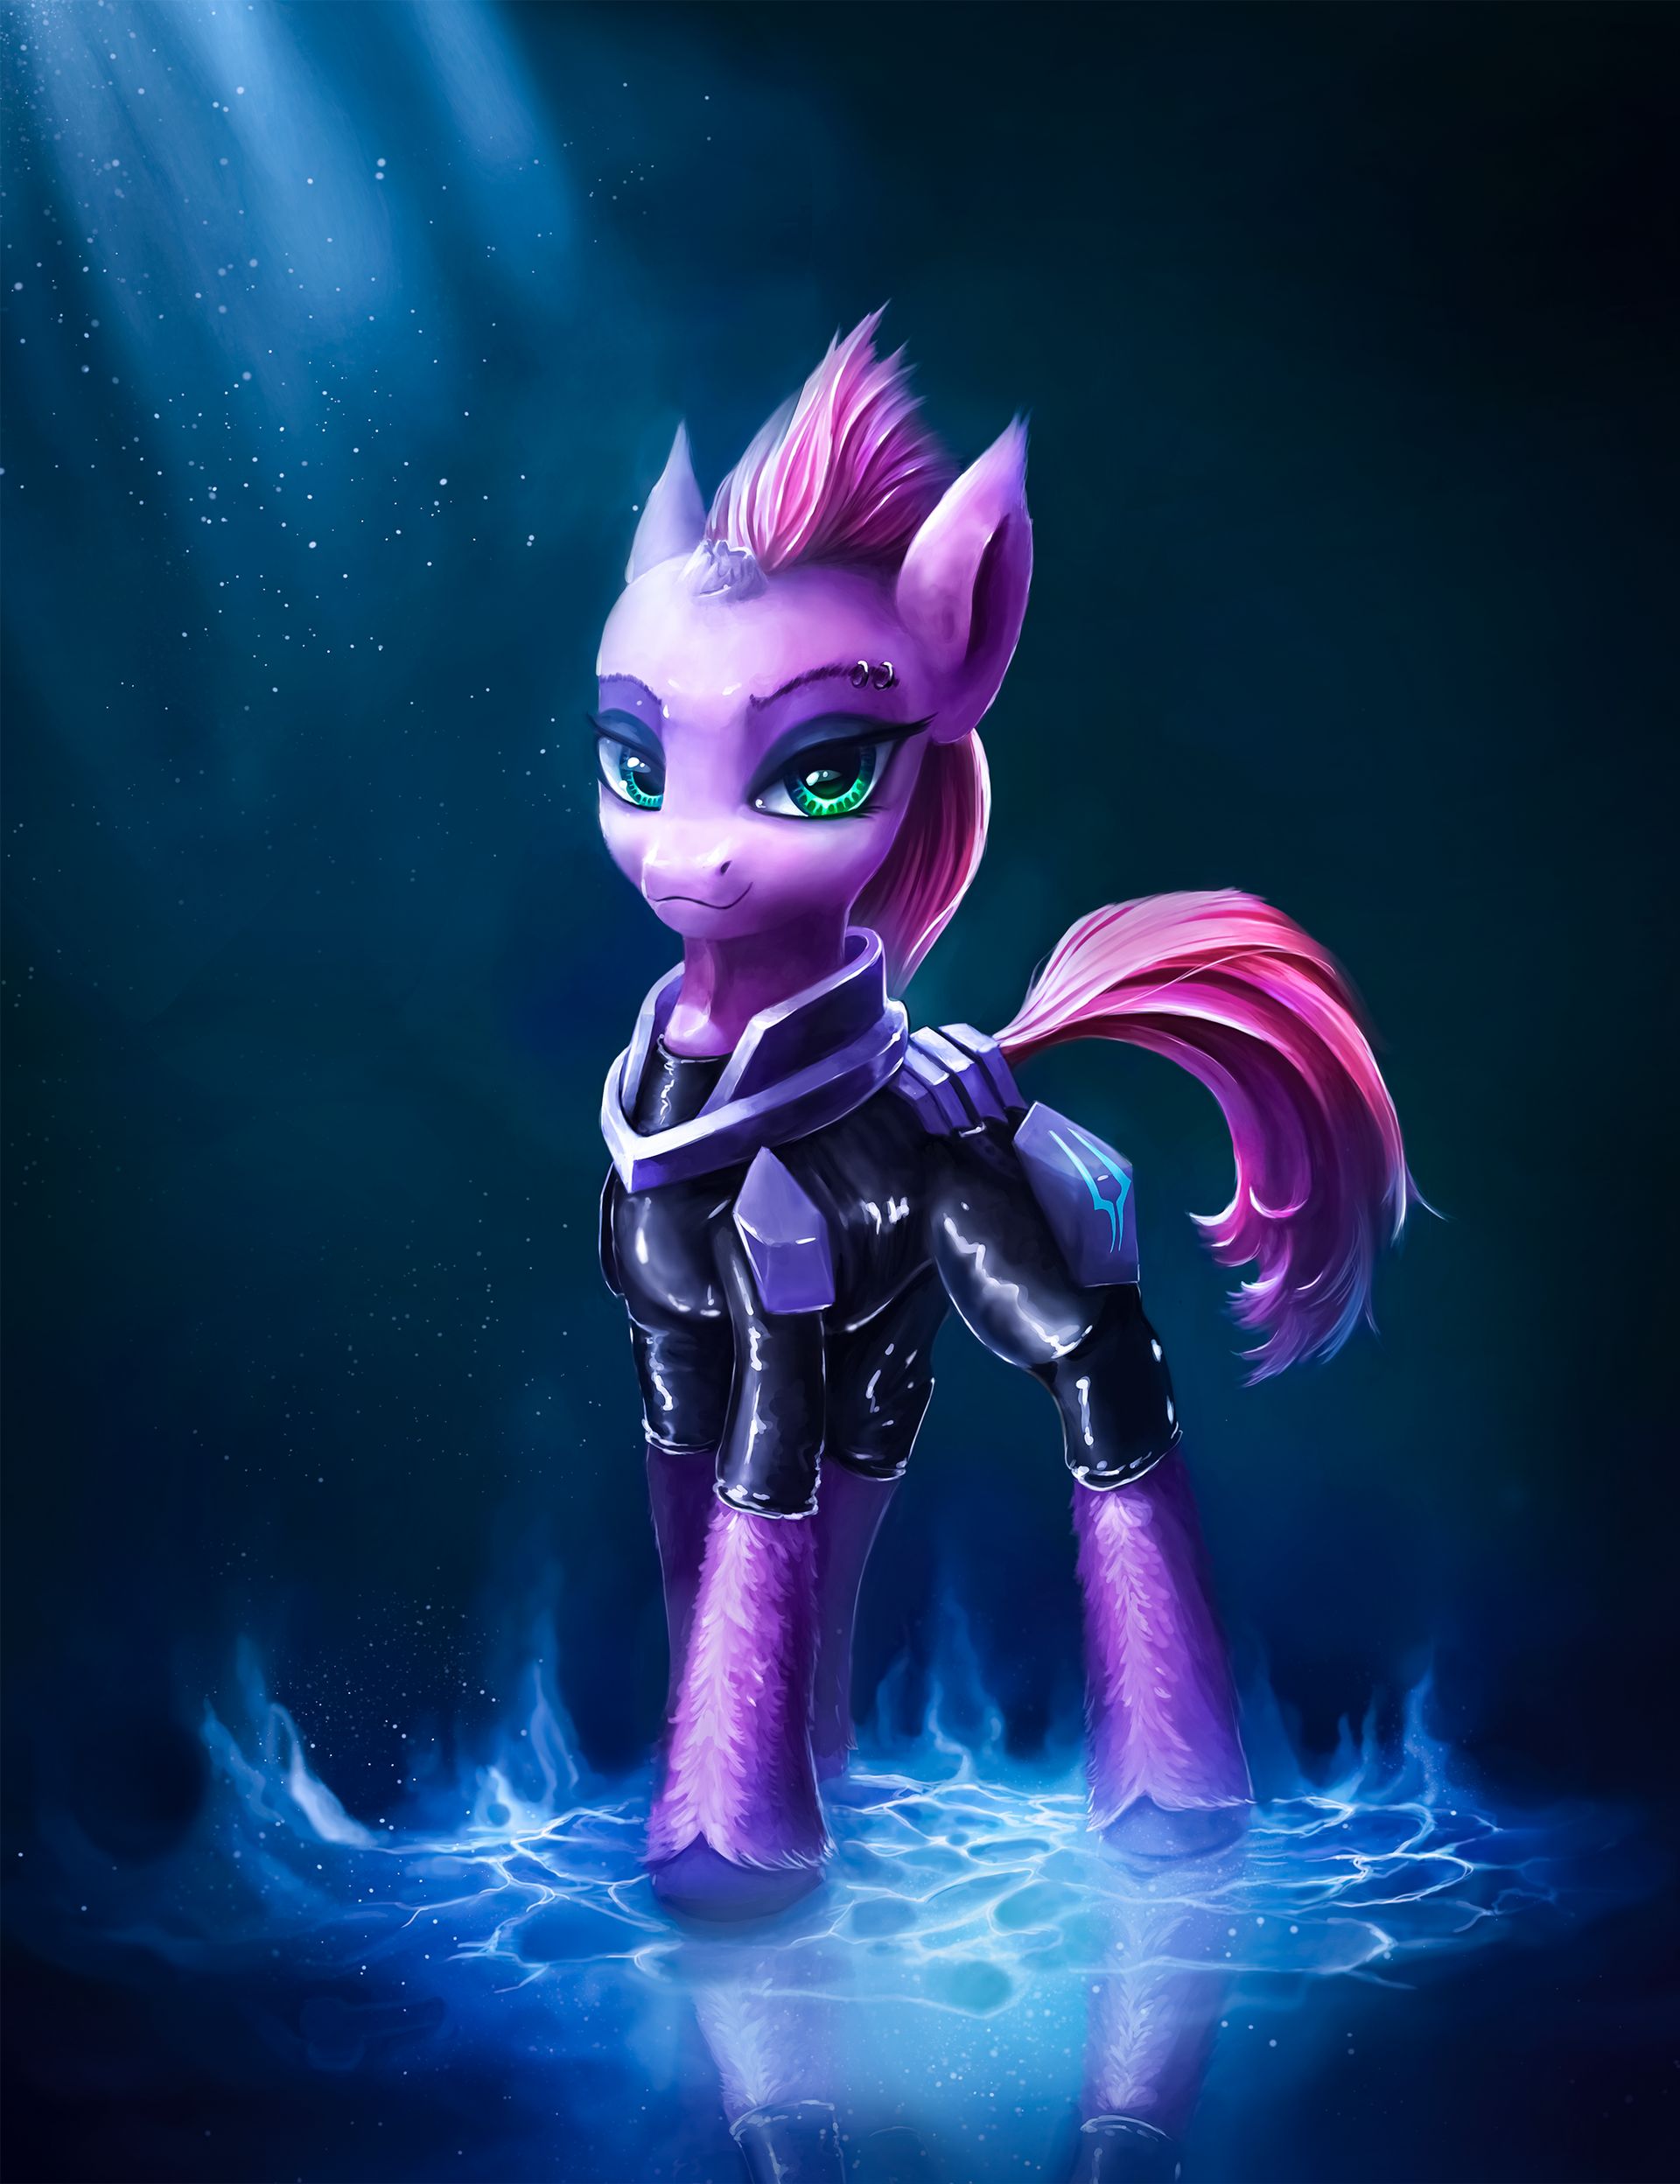 shadow_tempest_by_stdeadra_df1tb57-fullview.png